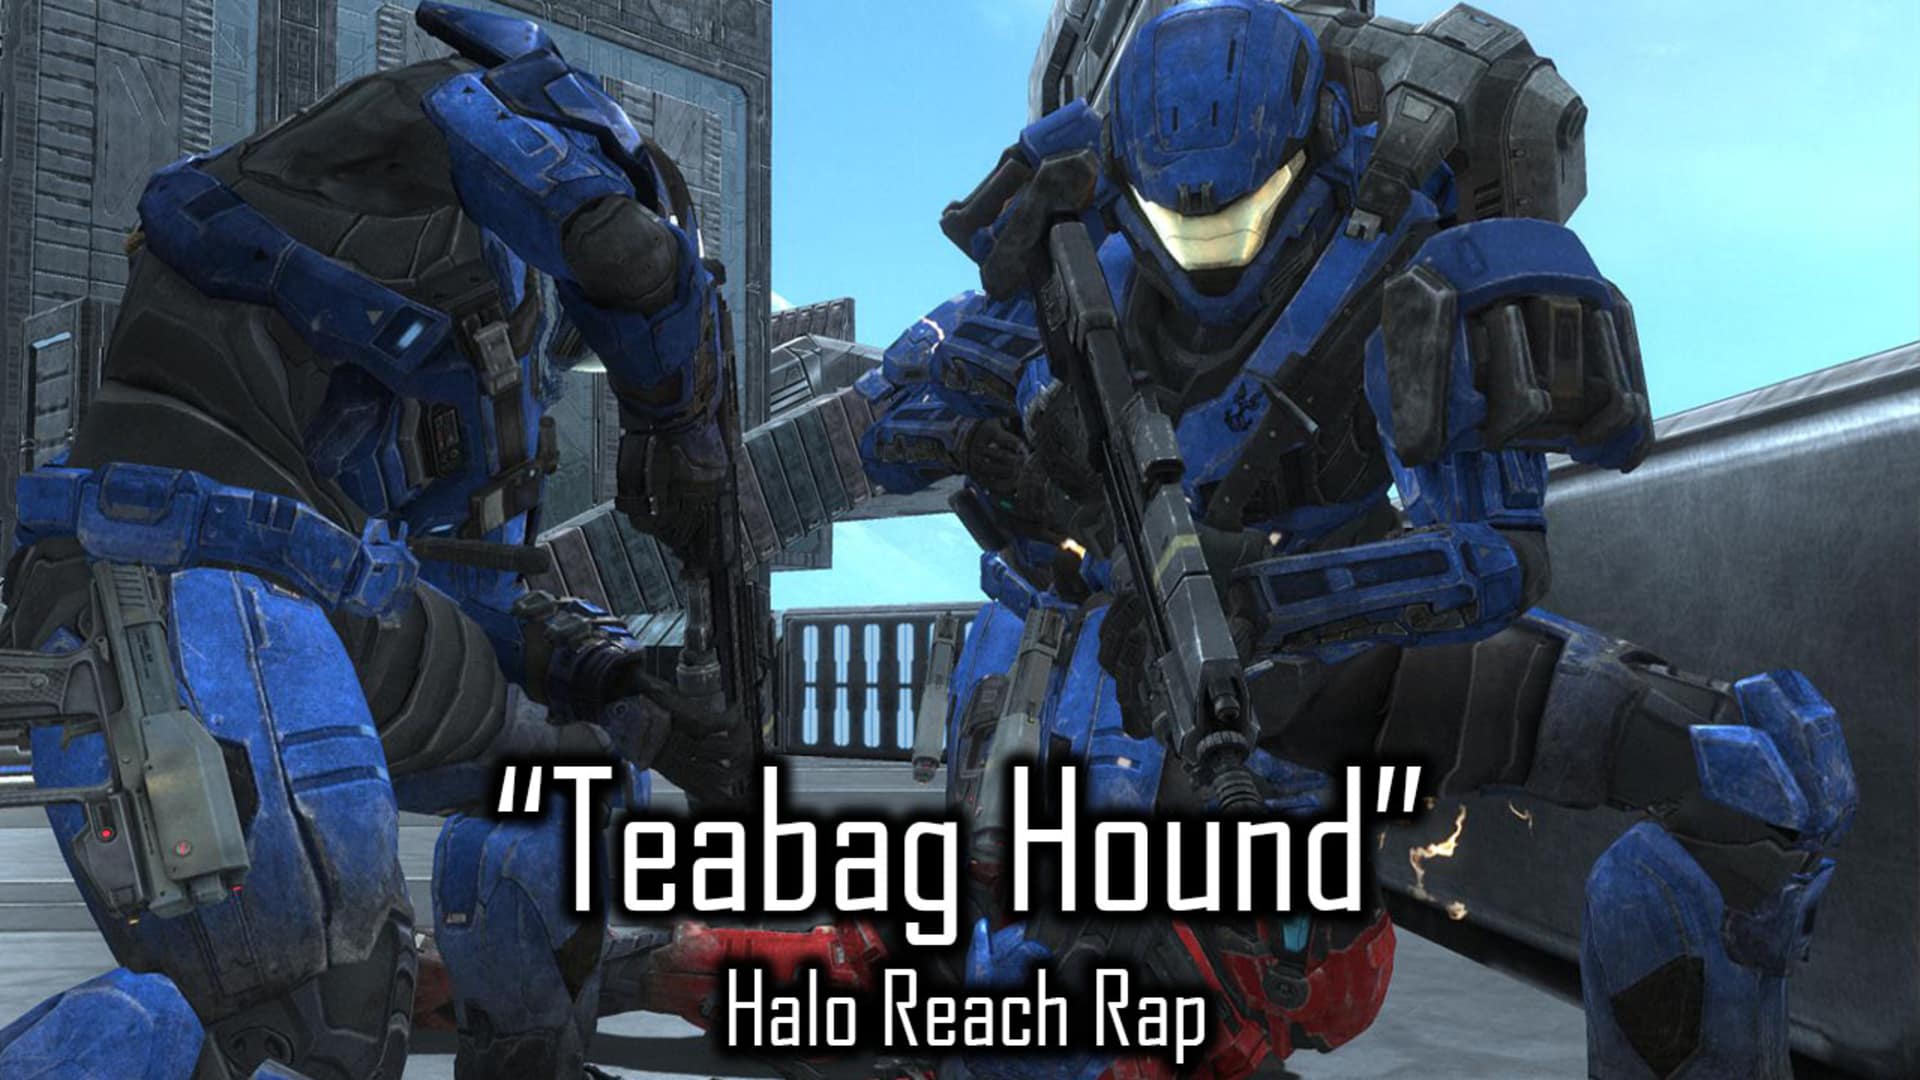 Halo Reach Song Teabag Hound Rooster Teeth - halo reach noob song roblox id